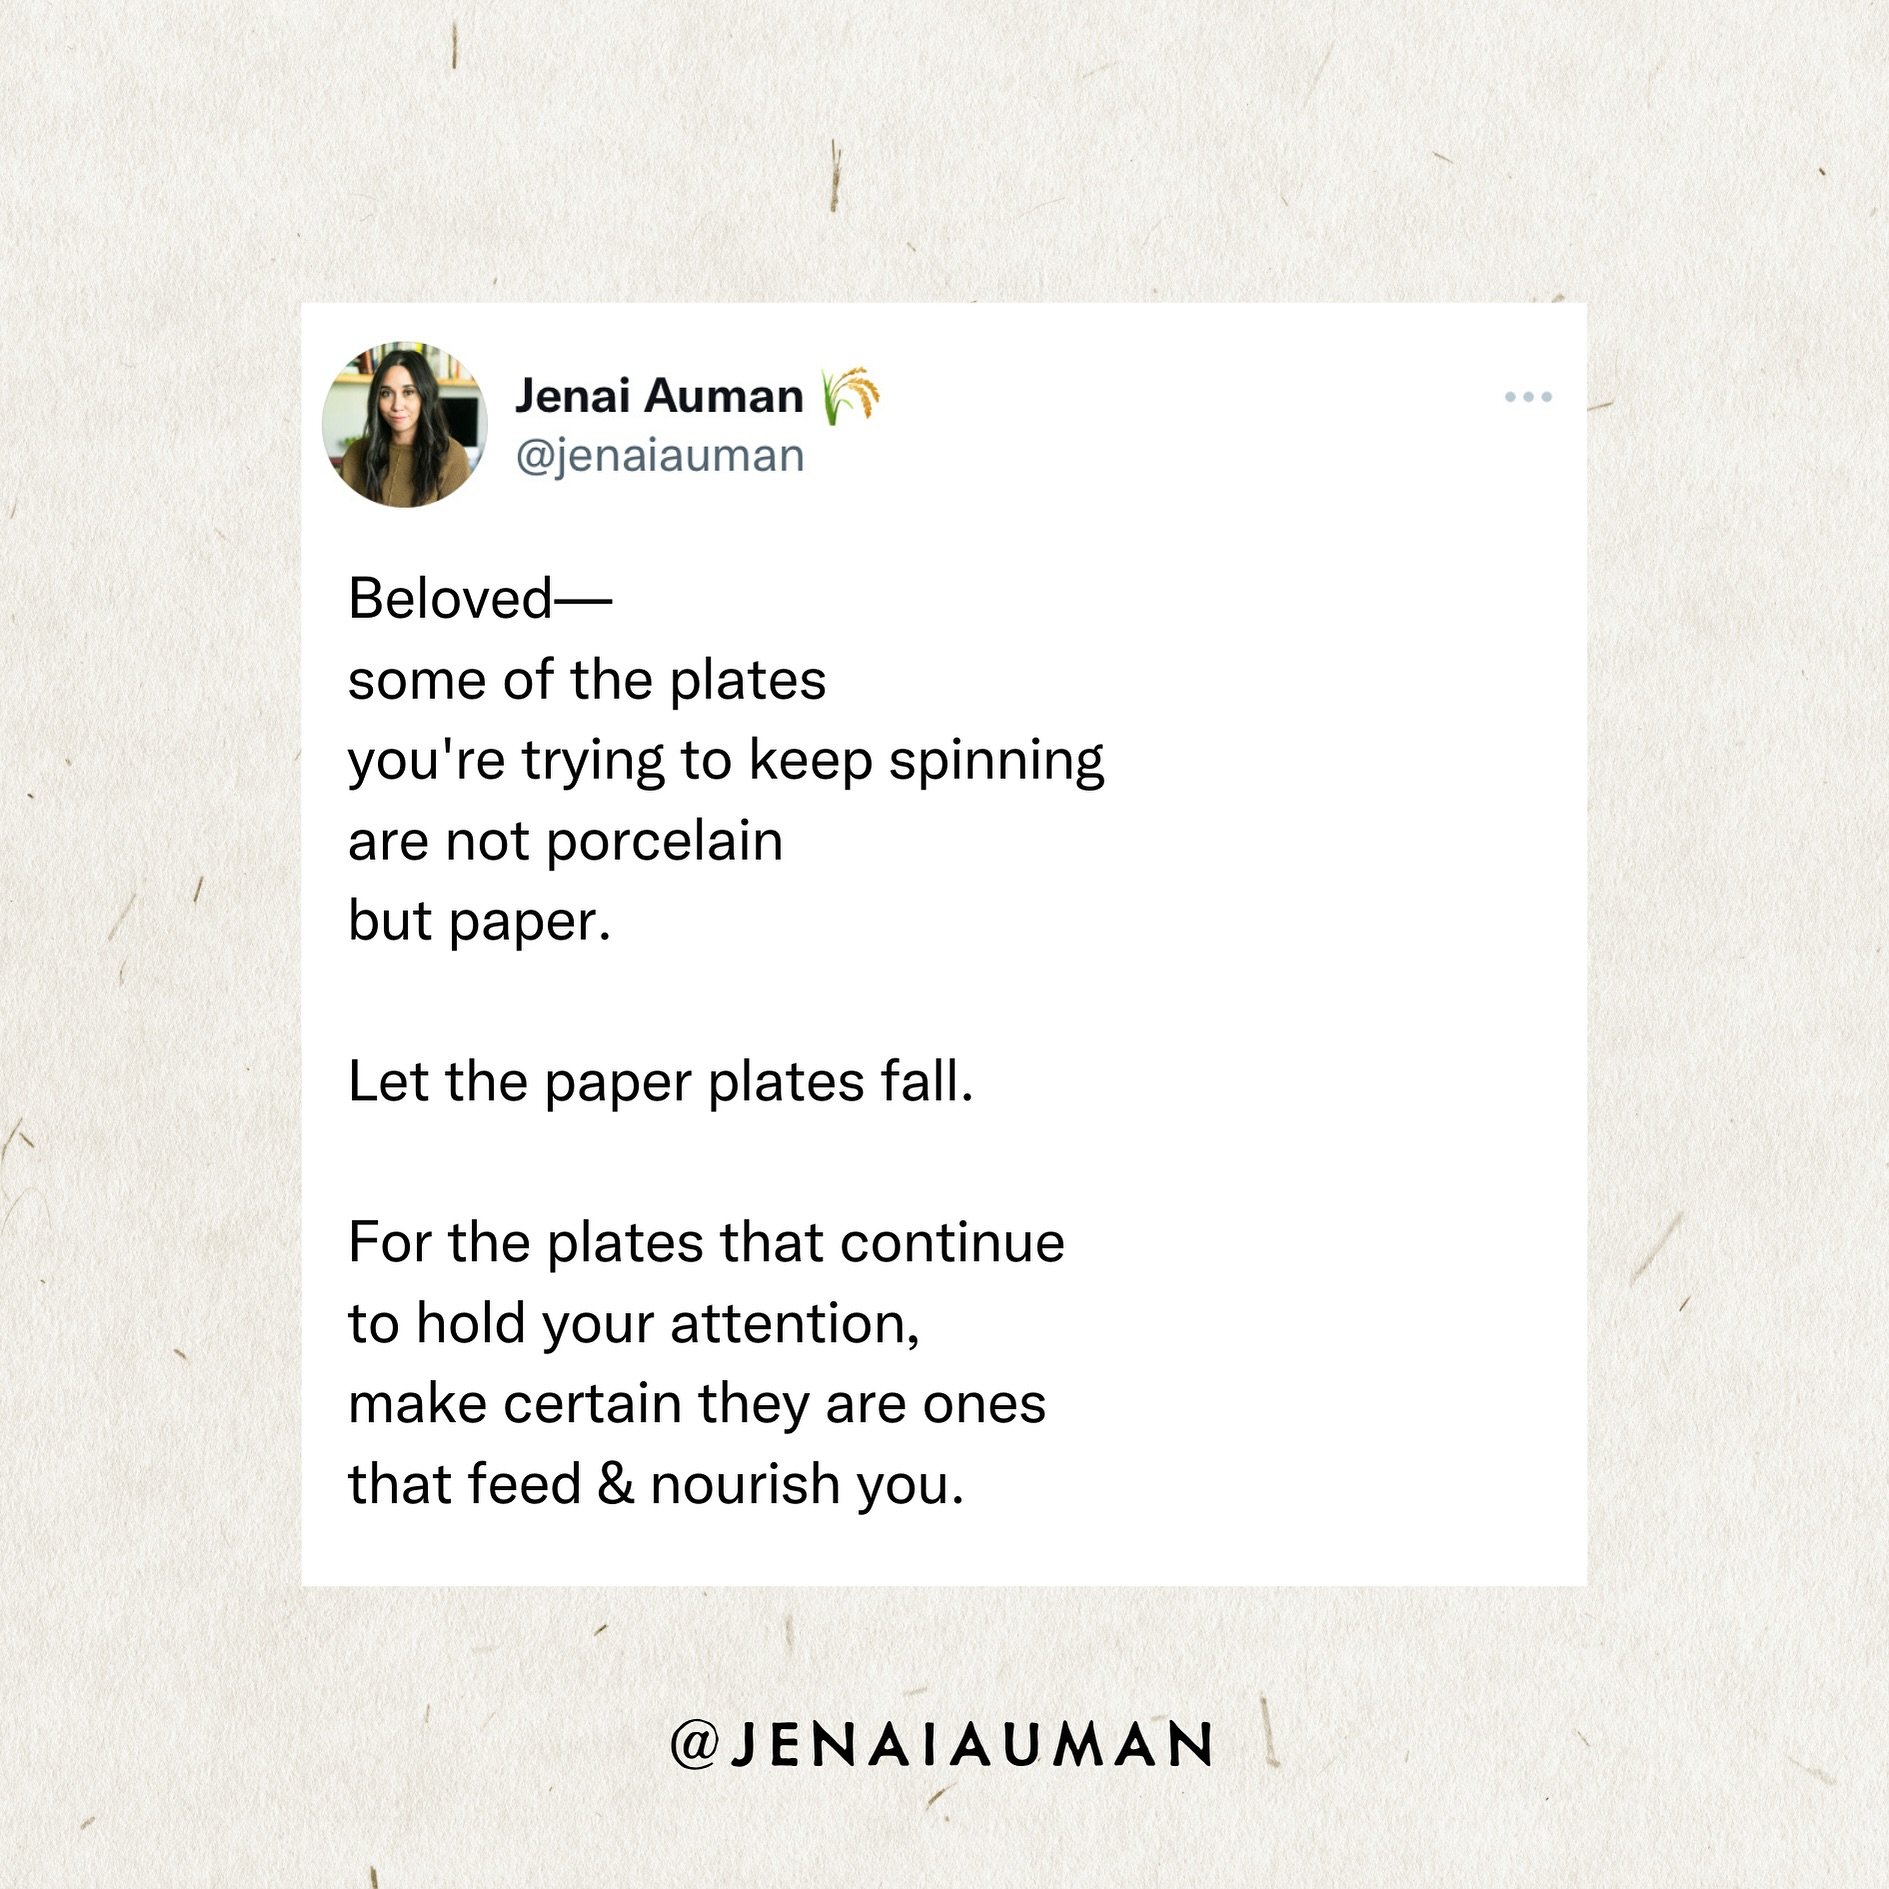 Beloved&mdash;
some of the plates
you&rsquo;re trying to keep spinning
are not porcelain
but paper.

Let the paper plates fall.

For the plates that continue 
to hold your attention,
make certain they are ones
that feed &amp; nourish you.

&mdash;&md